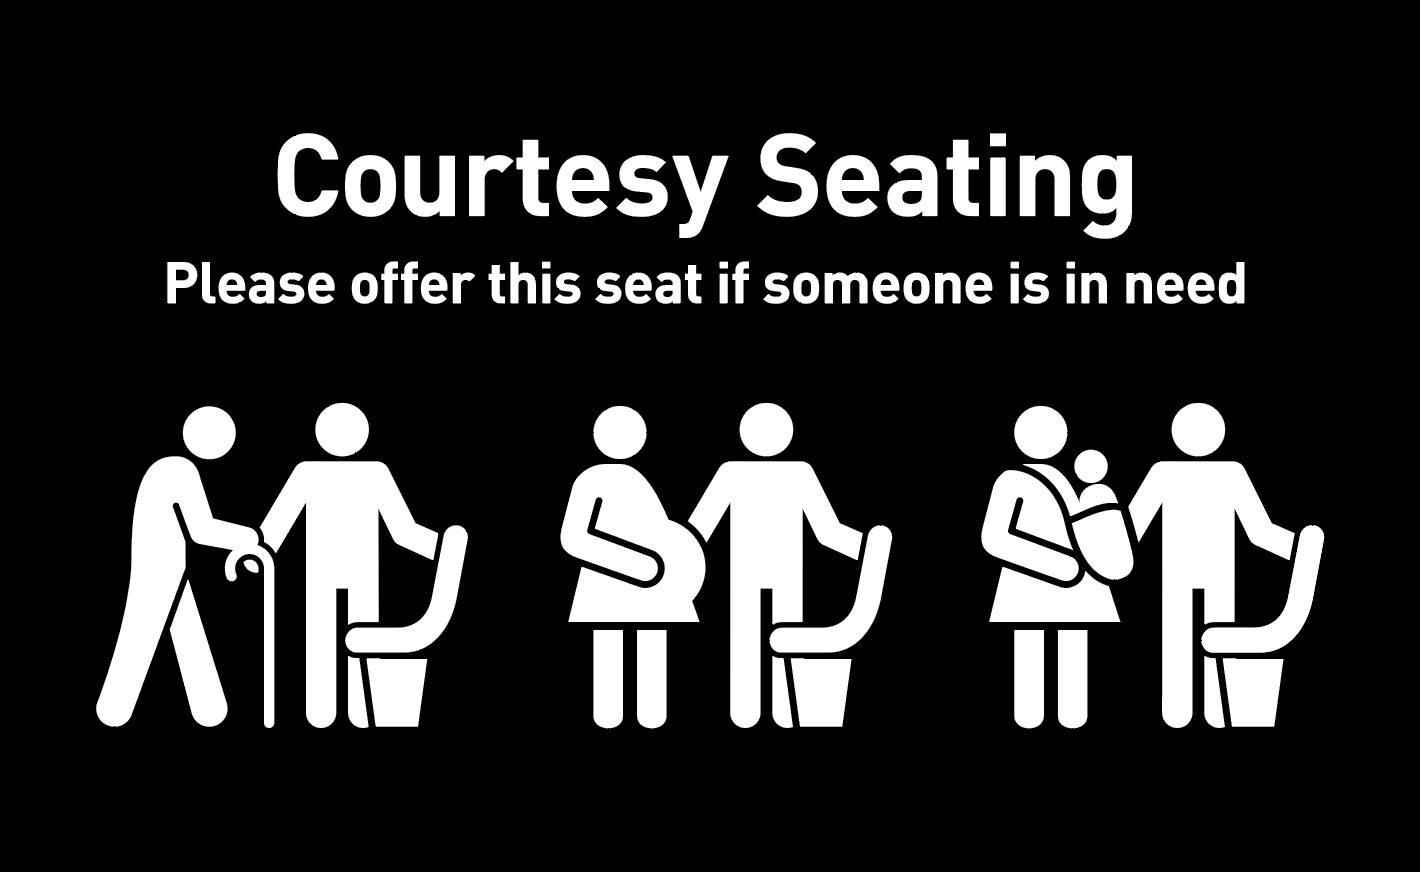 Courtesy Seating Sign: Please offer seat if someone is in needs, such elderlies, pregnant women, and people carrying a child